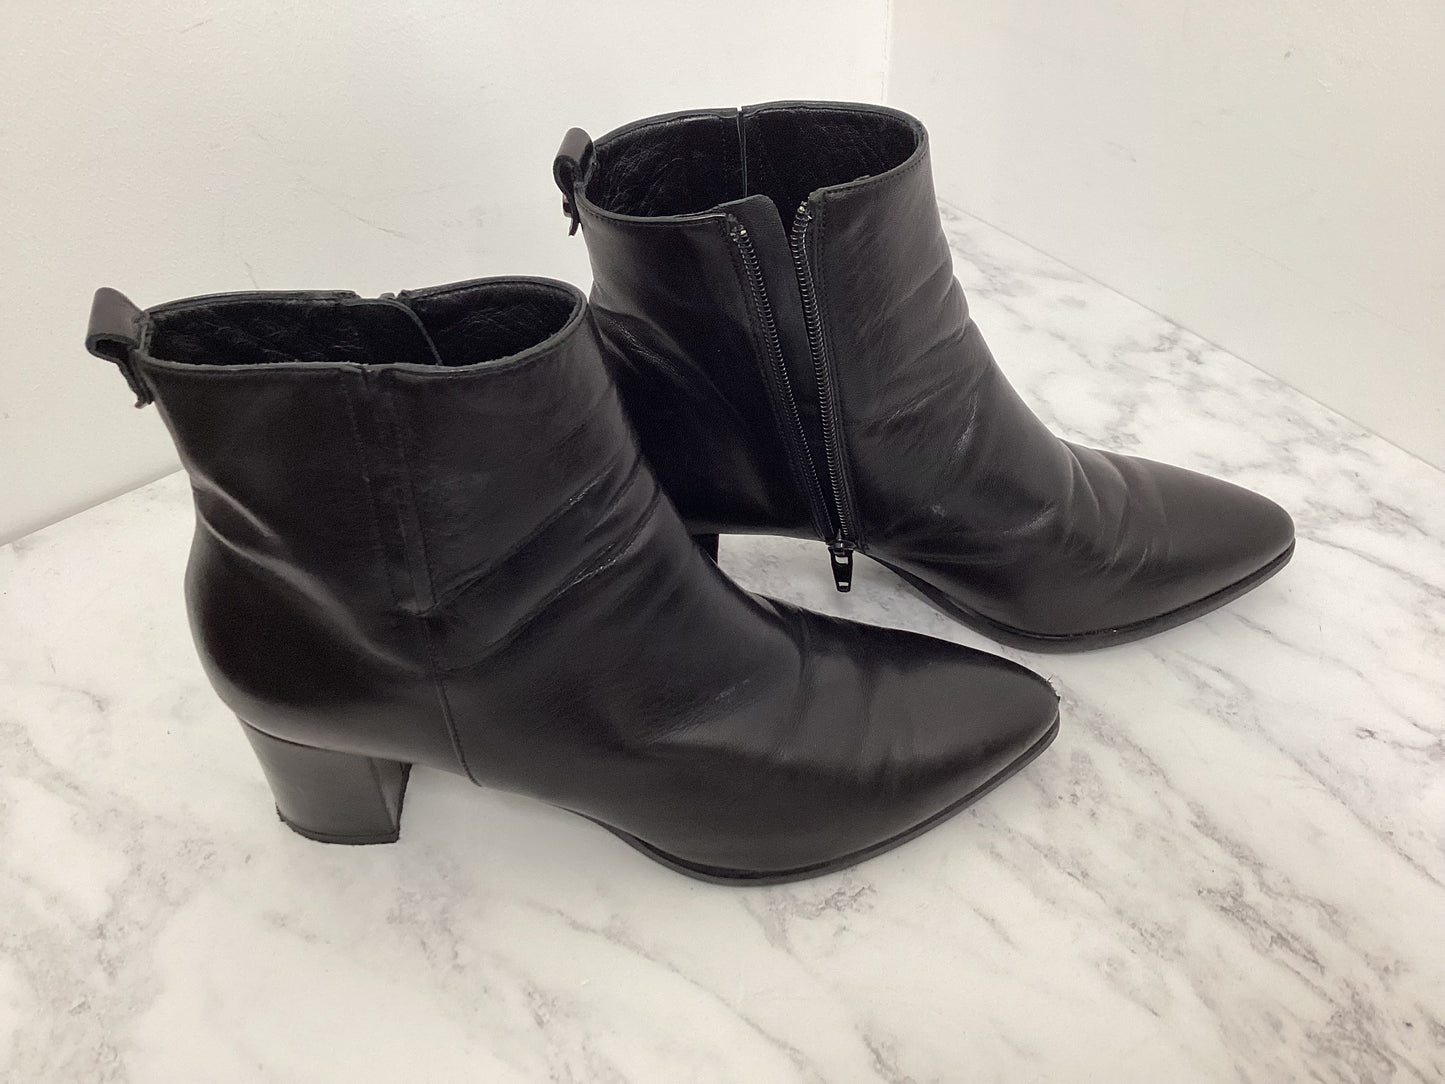 RUSSELL & BROMLEY - Network, Black Nappa Boots